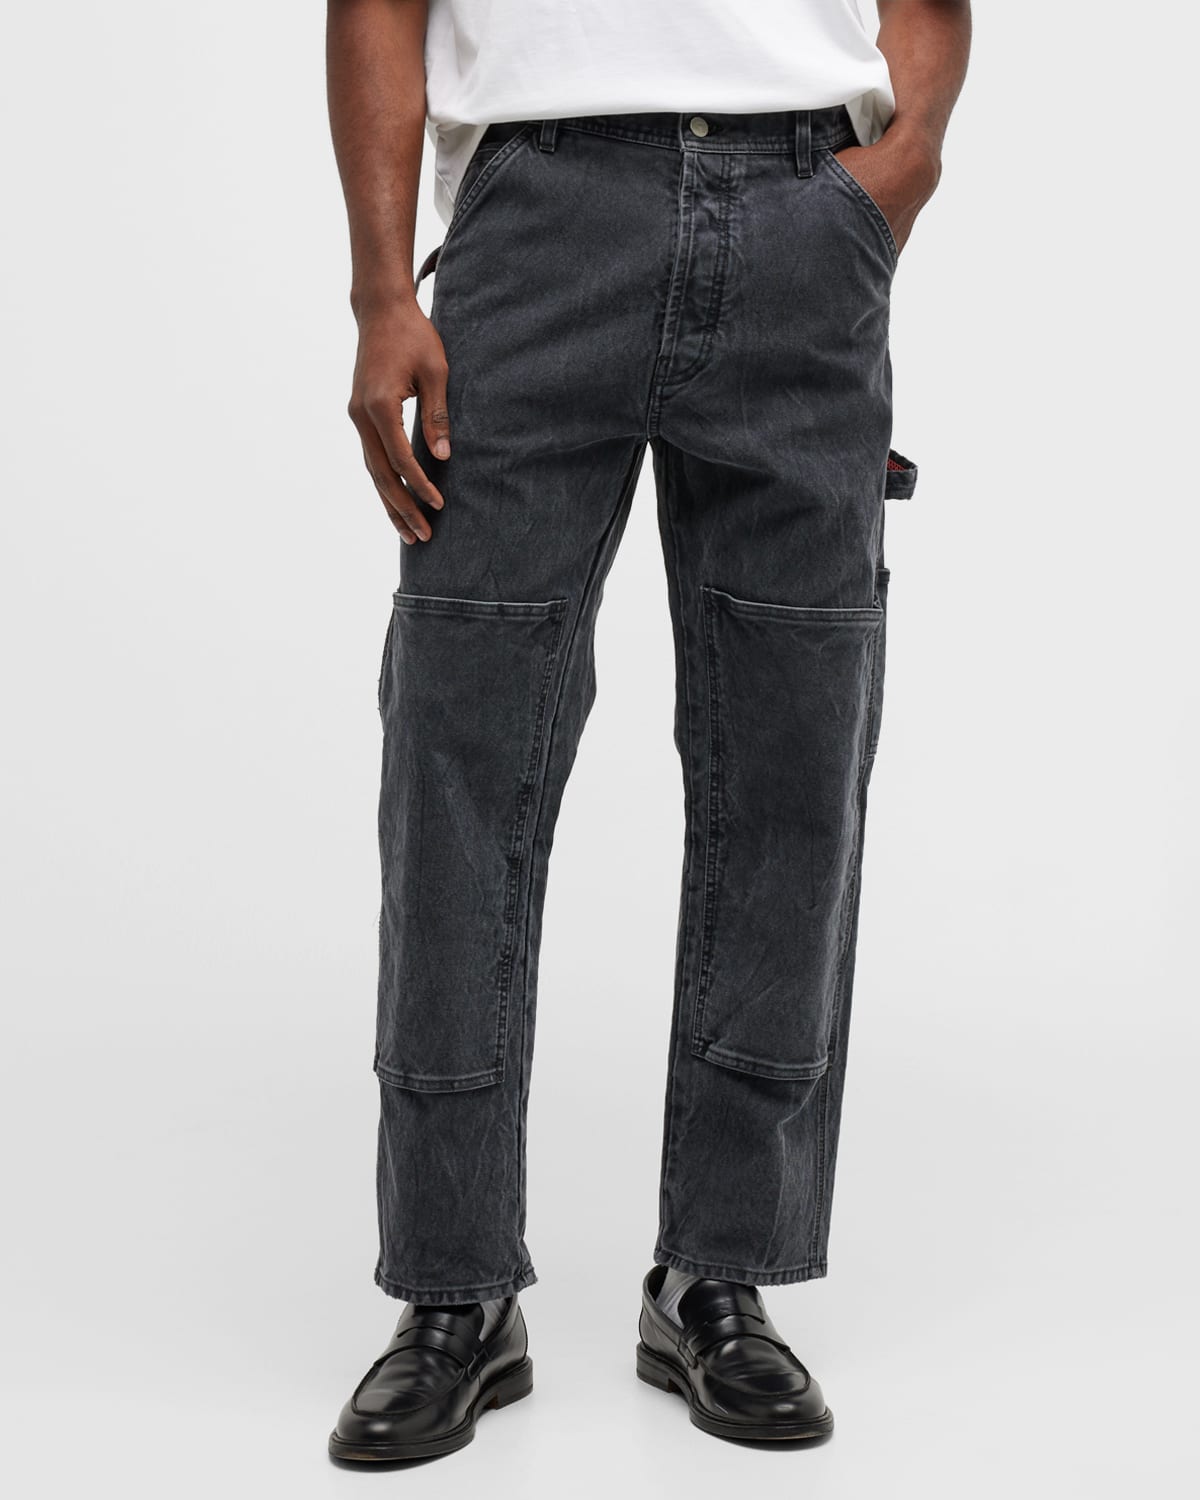 Le Pere X Cherry Kim Men's Solid Painter Trousers In Twisted Black